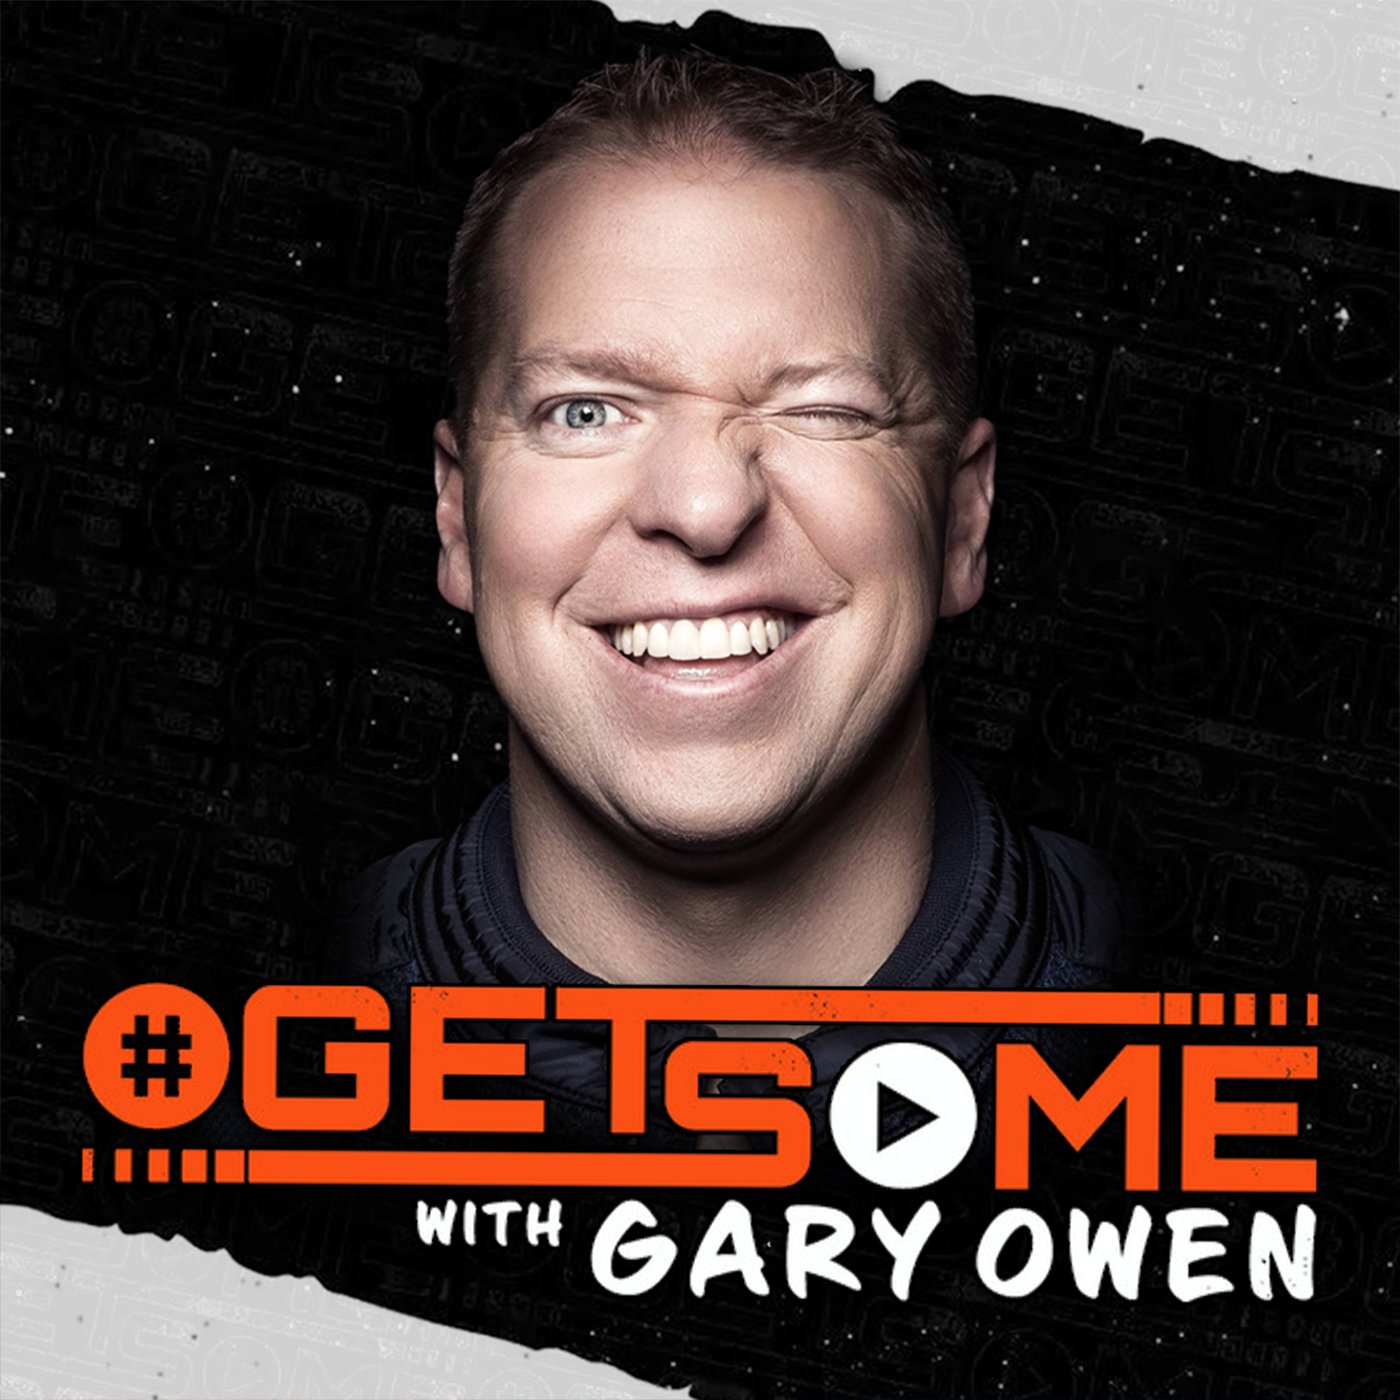 Tony Rock | #GetSome Ep. 168 with Gary Owen